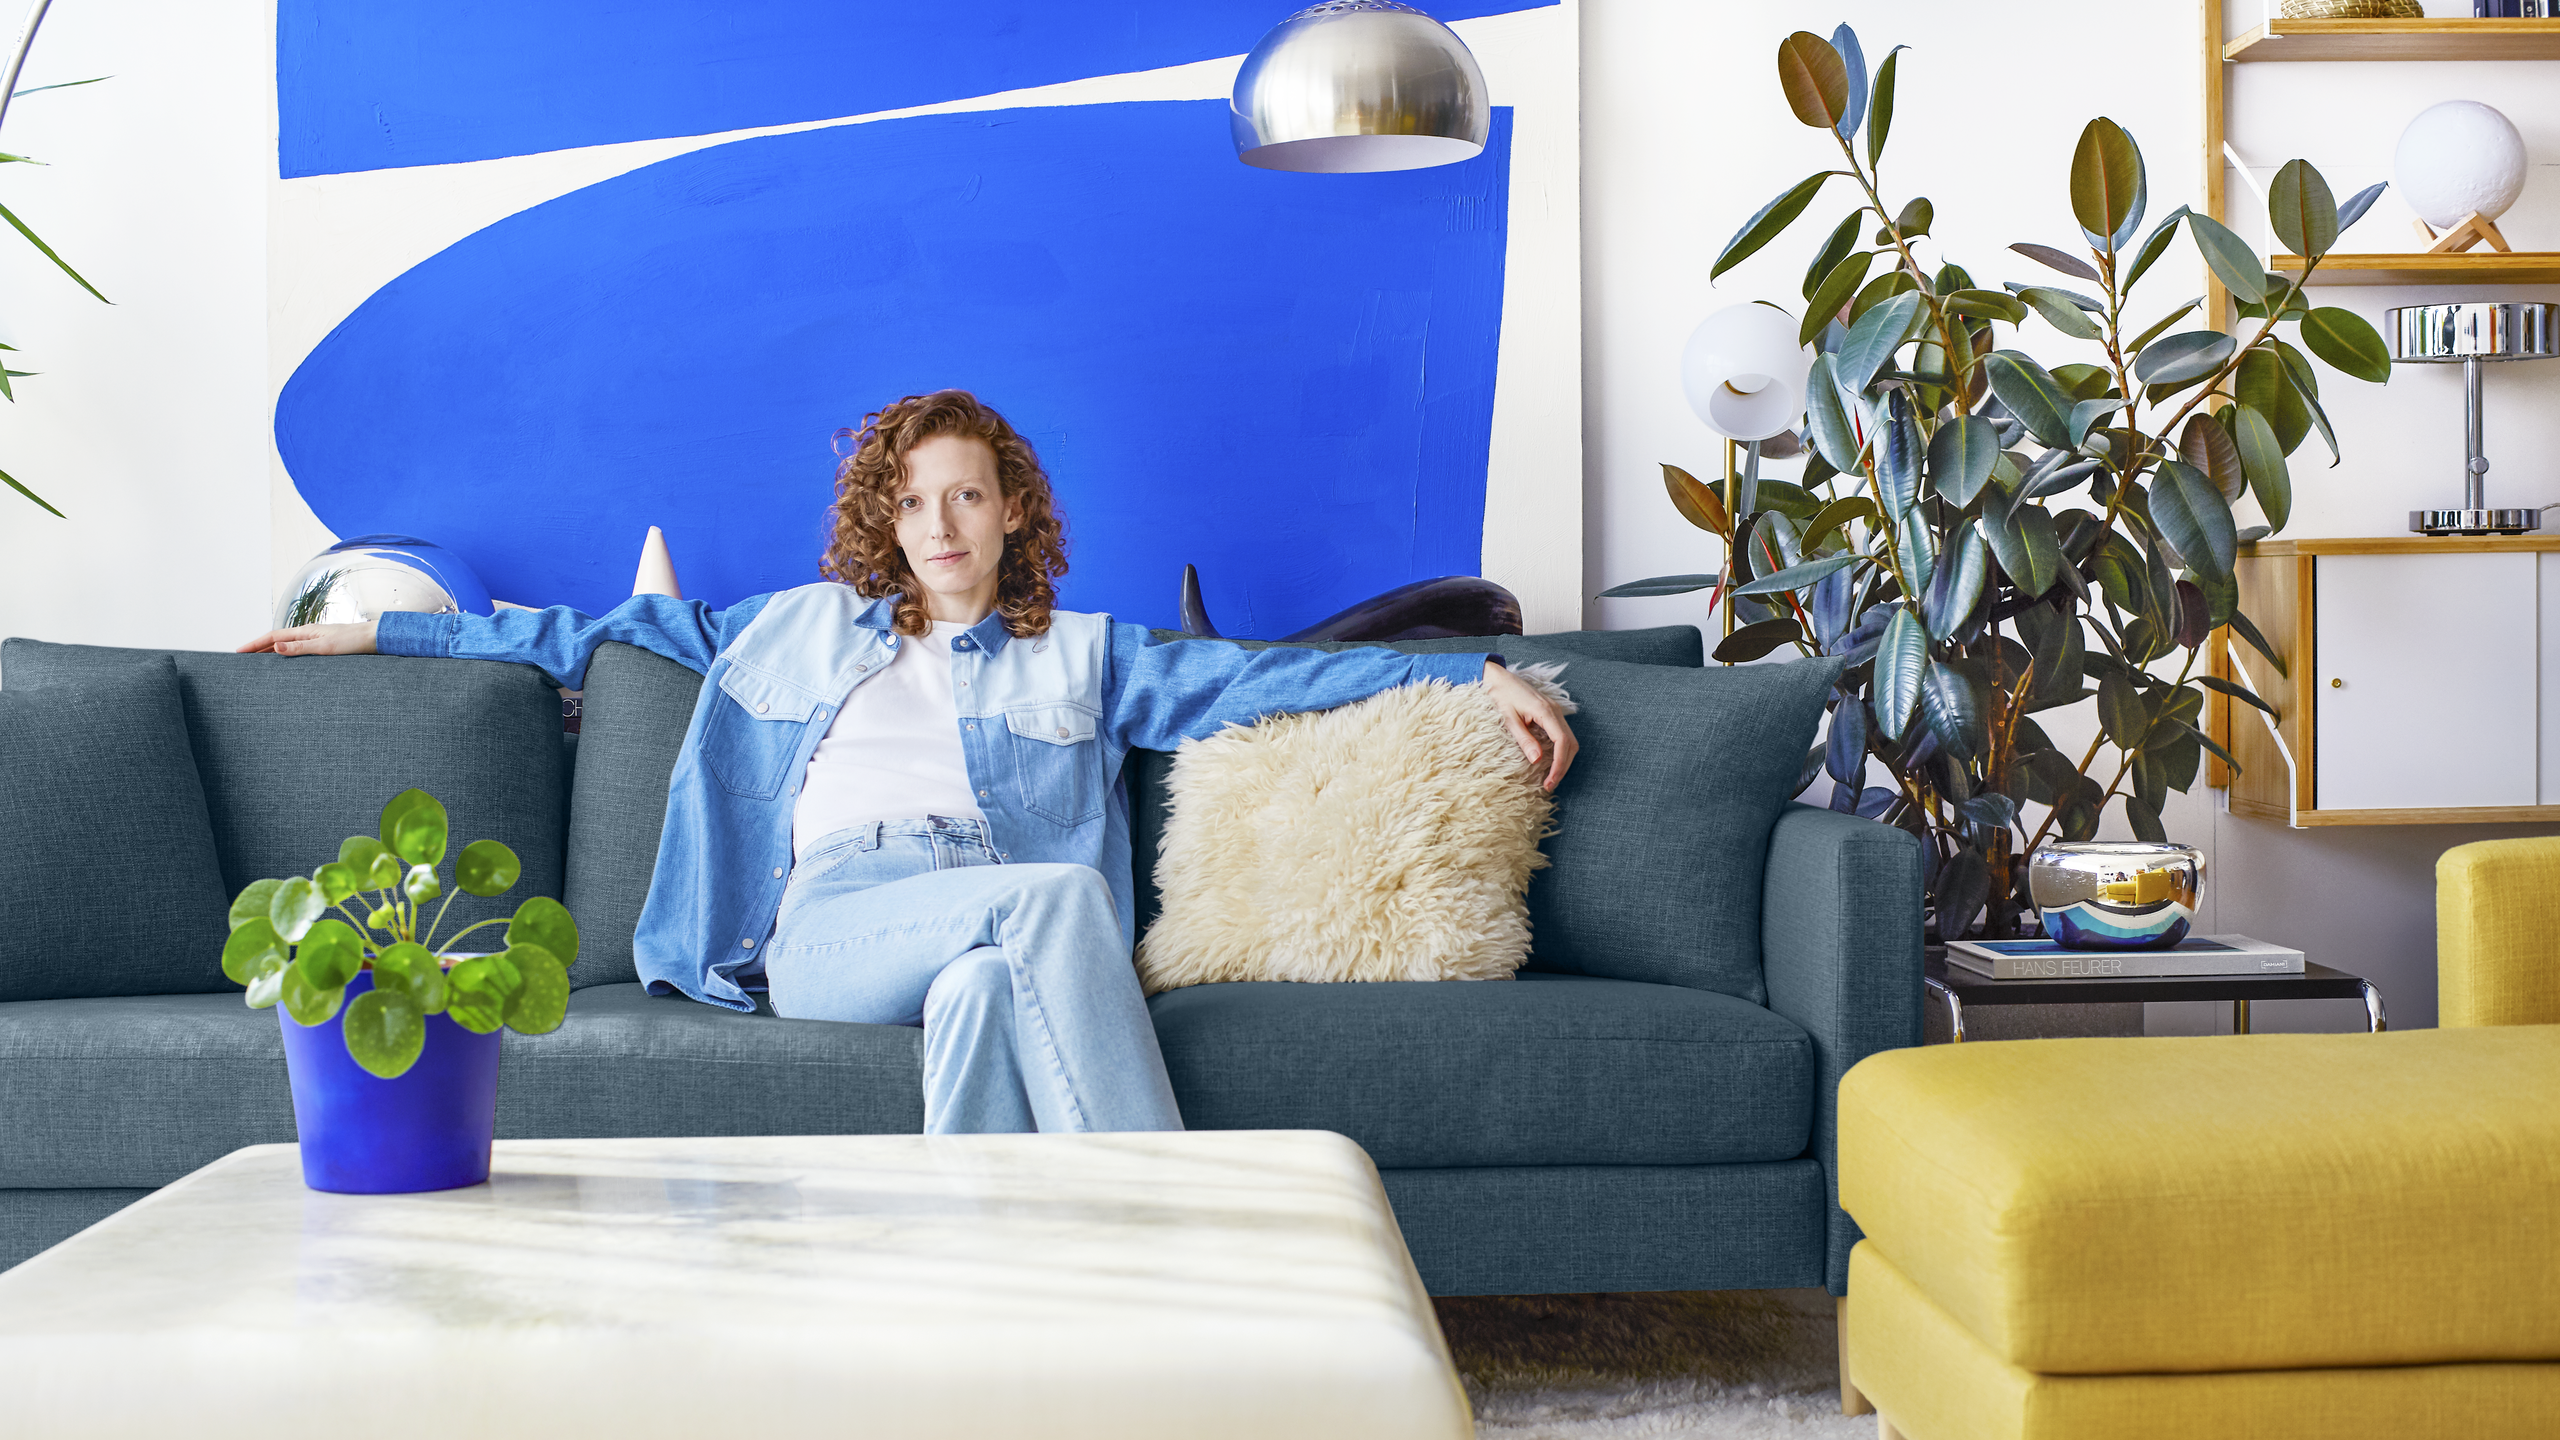 Woman sitting on teal sofa with white ottoman